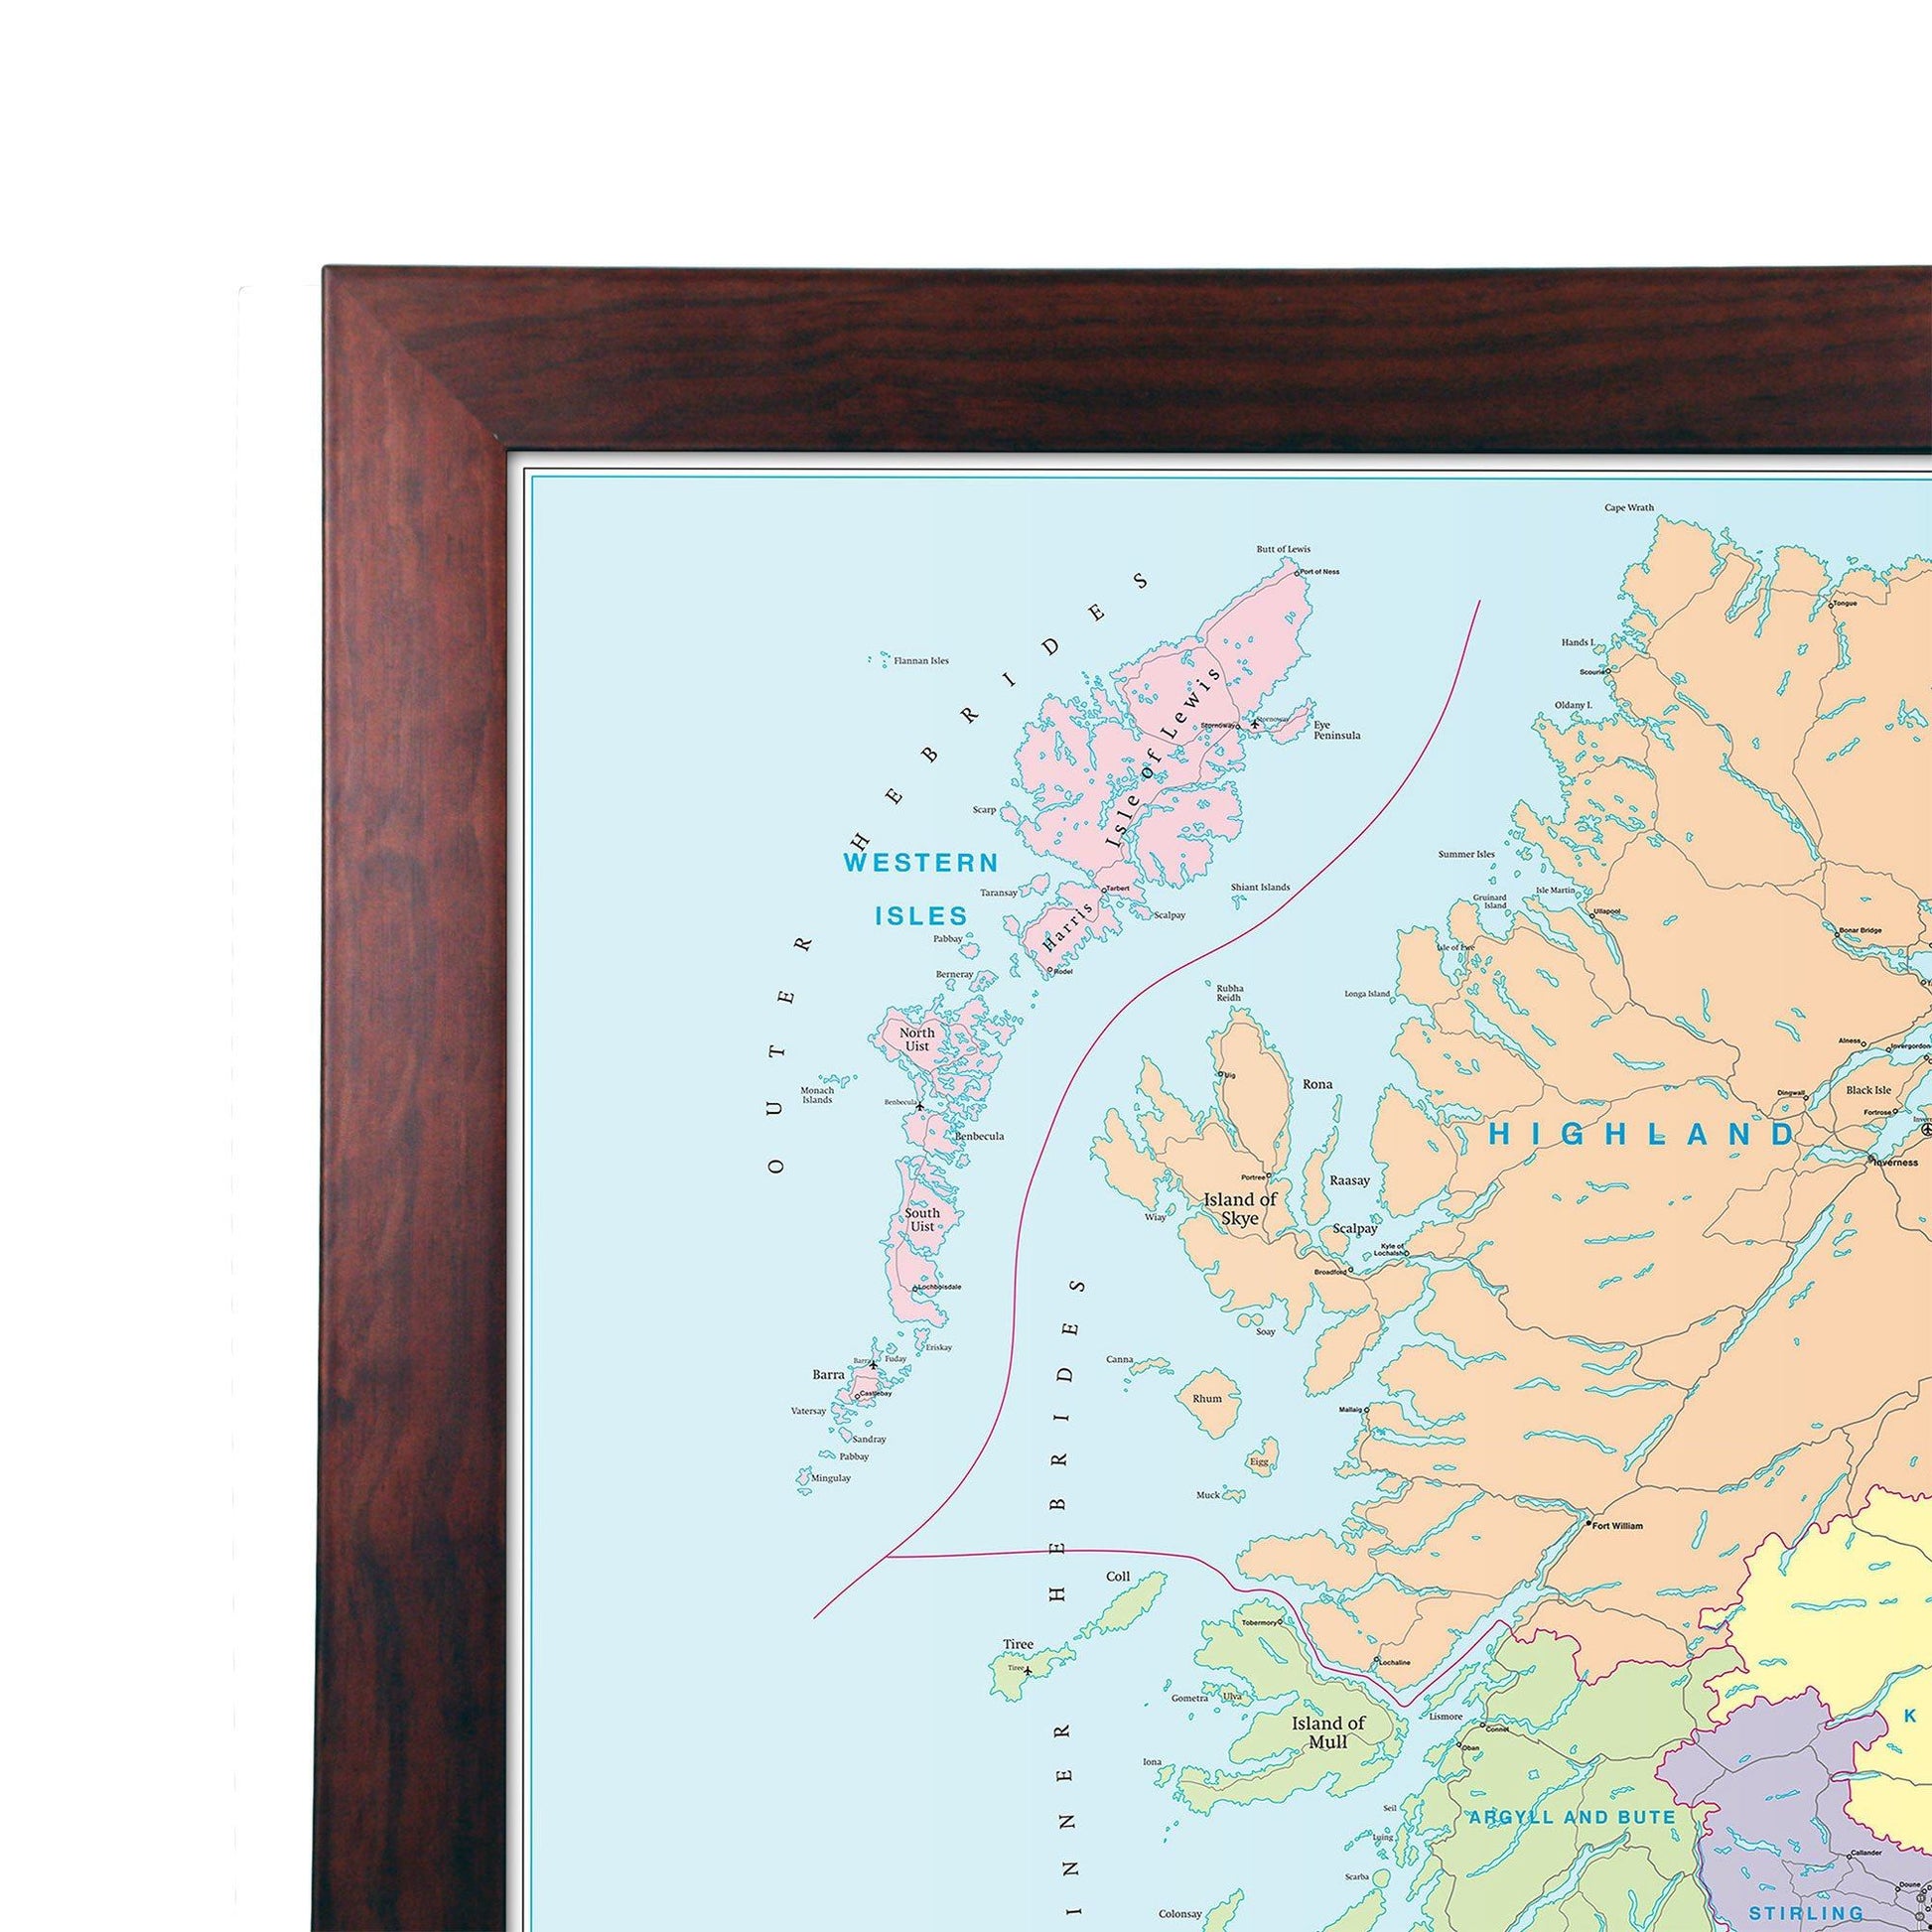 Wall Maps - Northern Scotland, Orkney And Shetland Regional Road Map - Wall Map 1